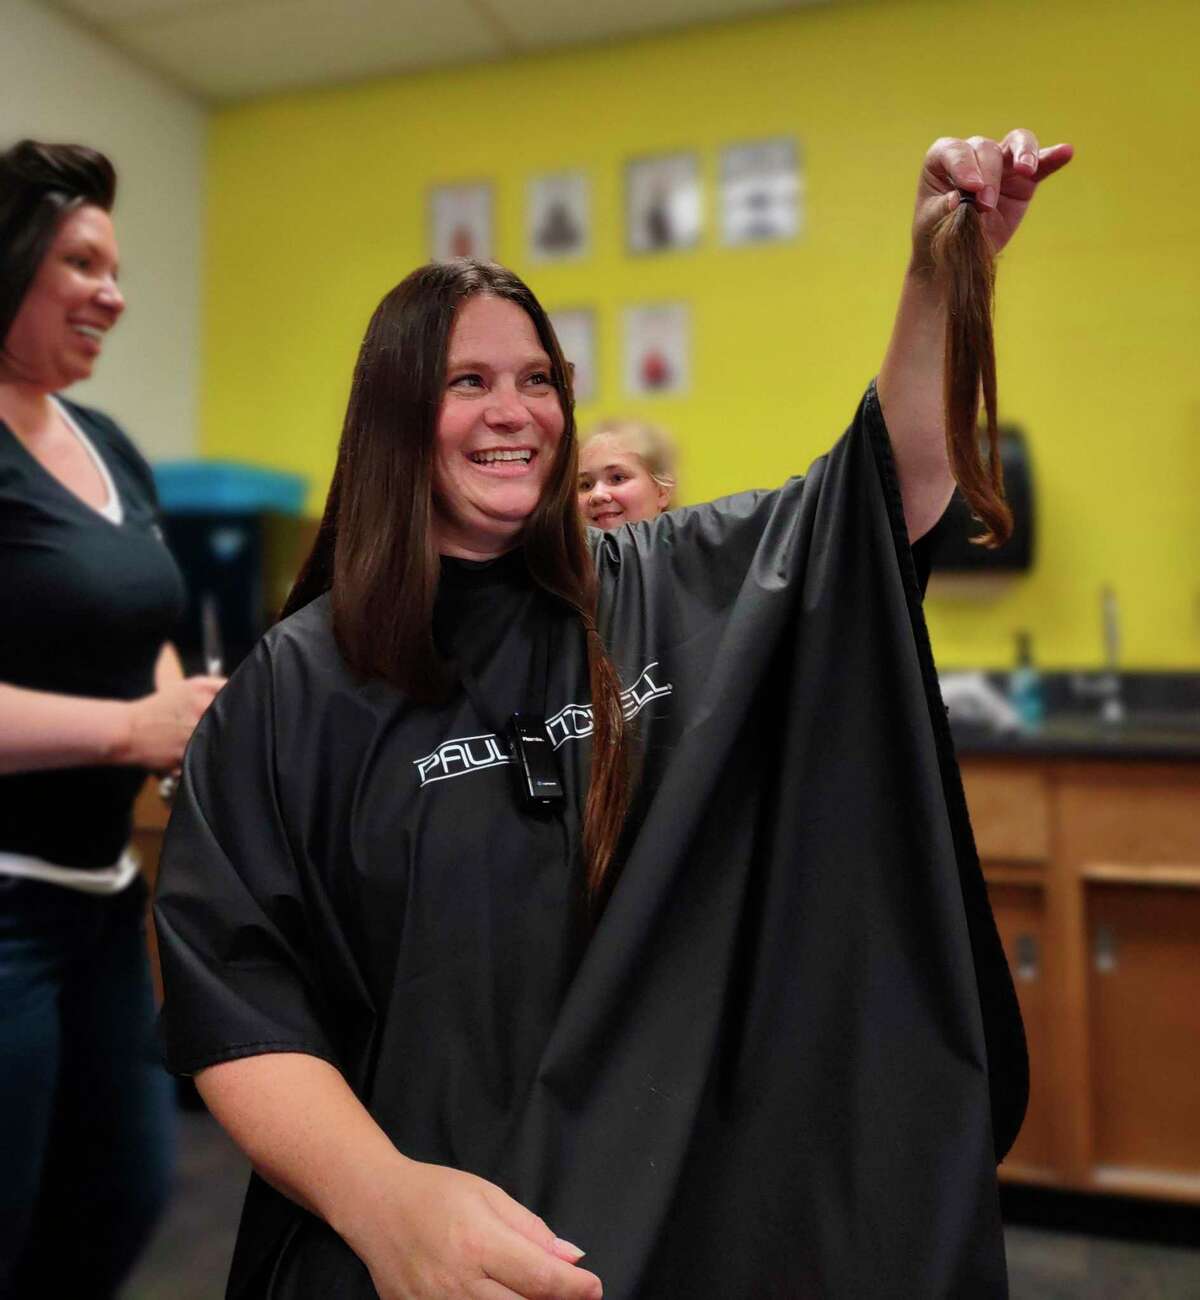 In the presence of her third-grade class, Morley Stanwood Comunity Schools elementary teacher Sarah Benson donated 10 inches of her hair to the nonprofit Children With Hair Loss. (Courtesy/Tara Lovejoy)